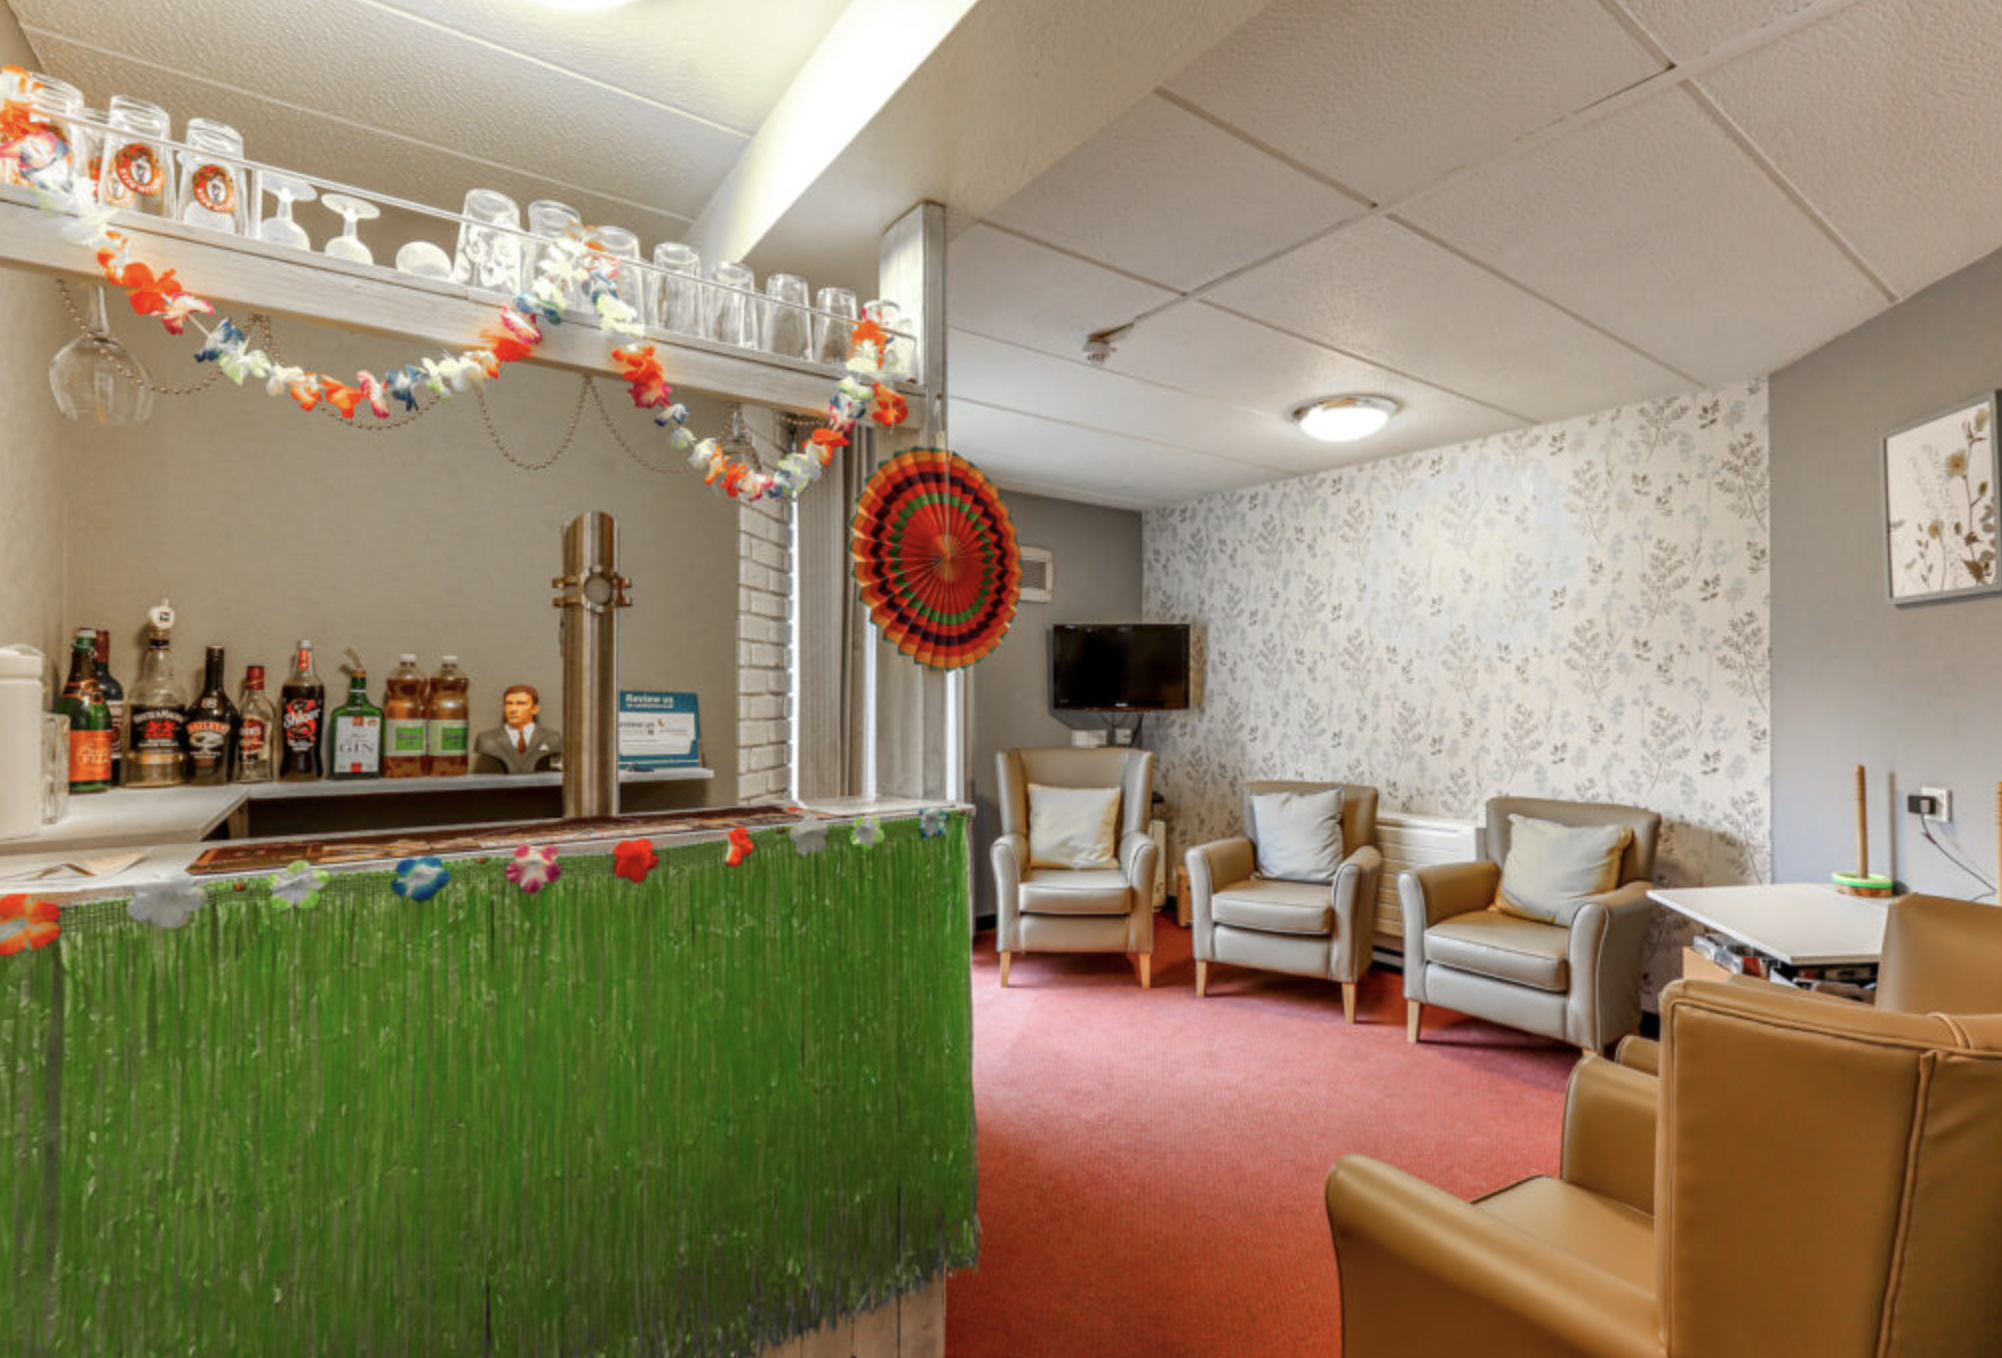 Lounge of Crossways care home in Northwich, Cheshire